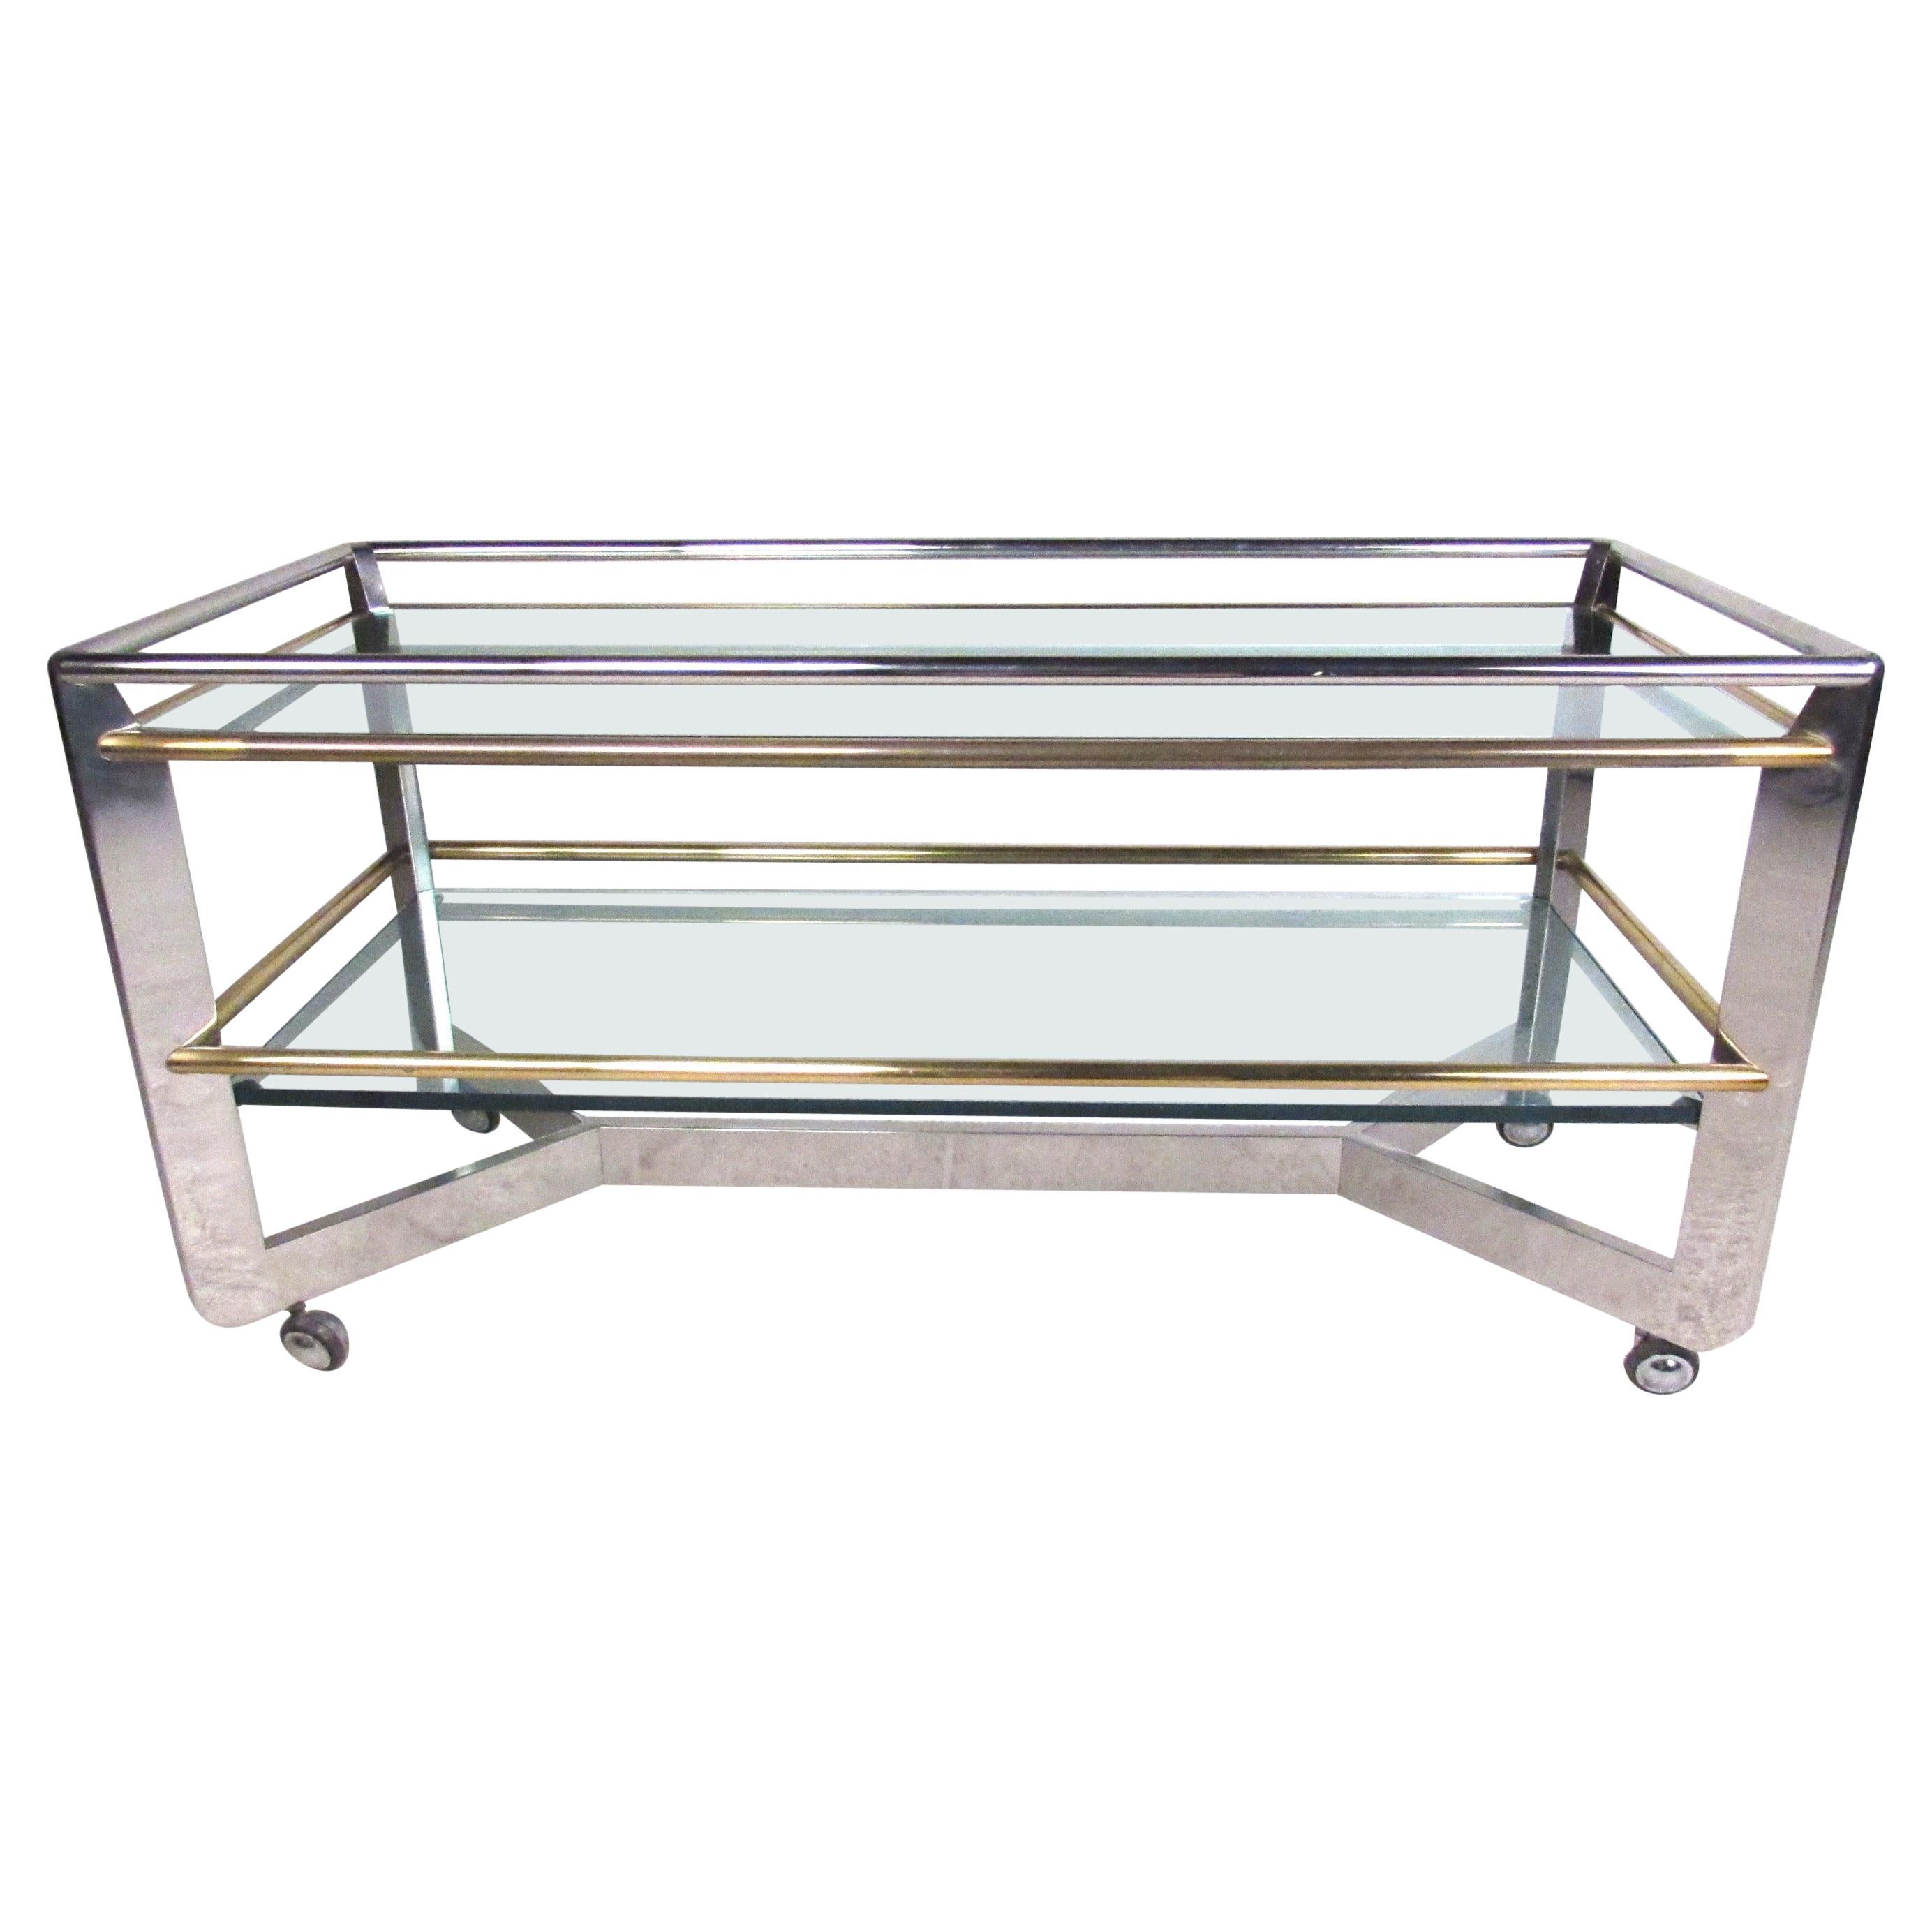 High-quality two-tier cart ideal for use as a serving trolley or in a retail display setting. Features include heavy-duty chrome frame construction with brass railings, 3/4